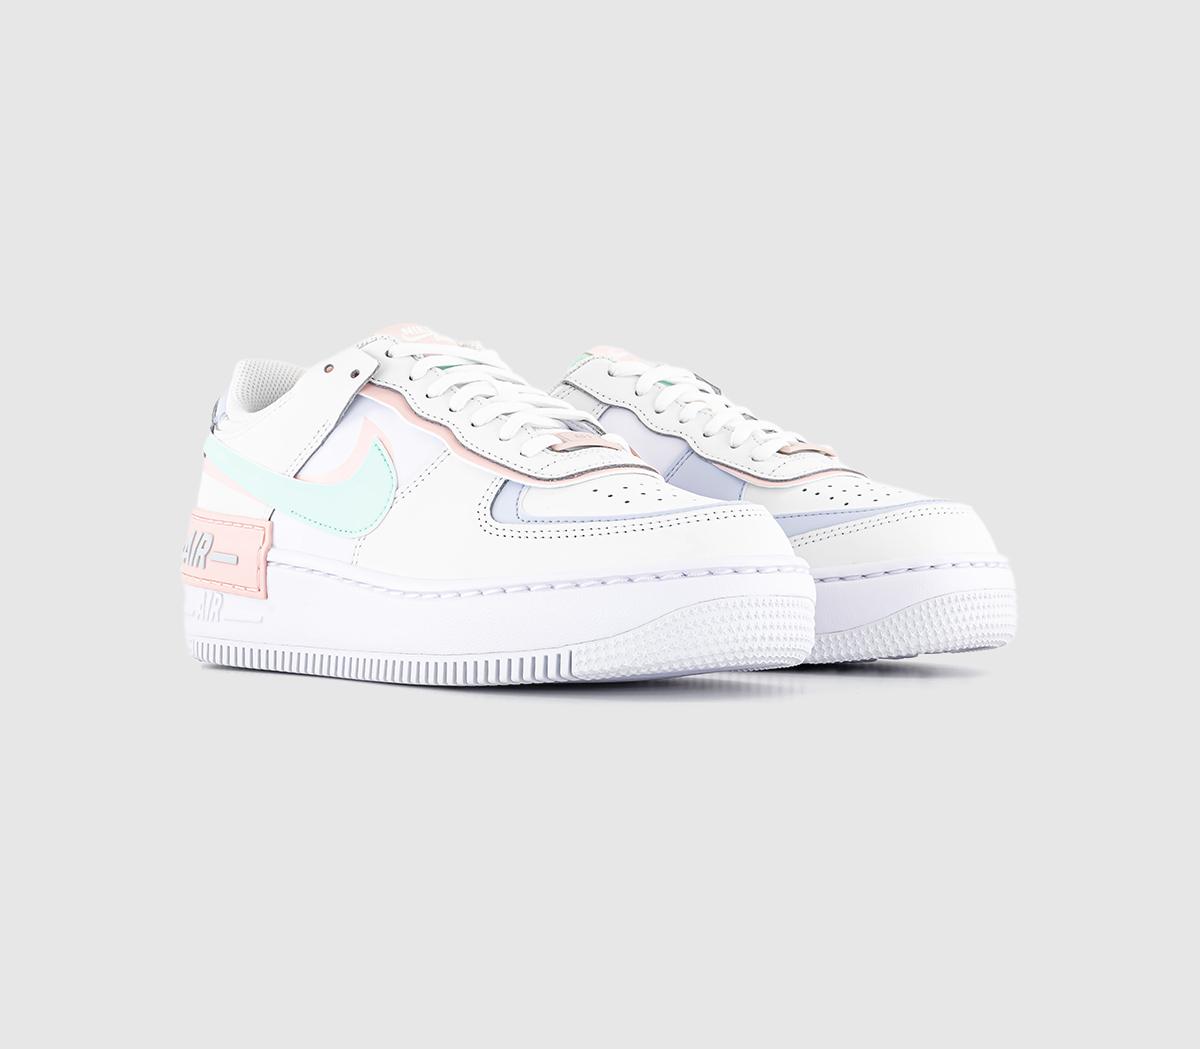 Nike Womens Air Force 1 Shadow Trainers White Atmosphere Mint Foam Football Grey Mixed Material, 5.5